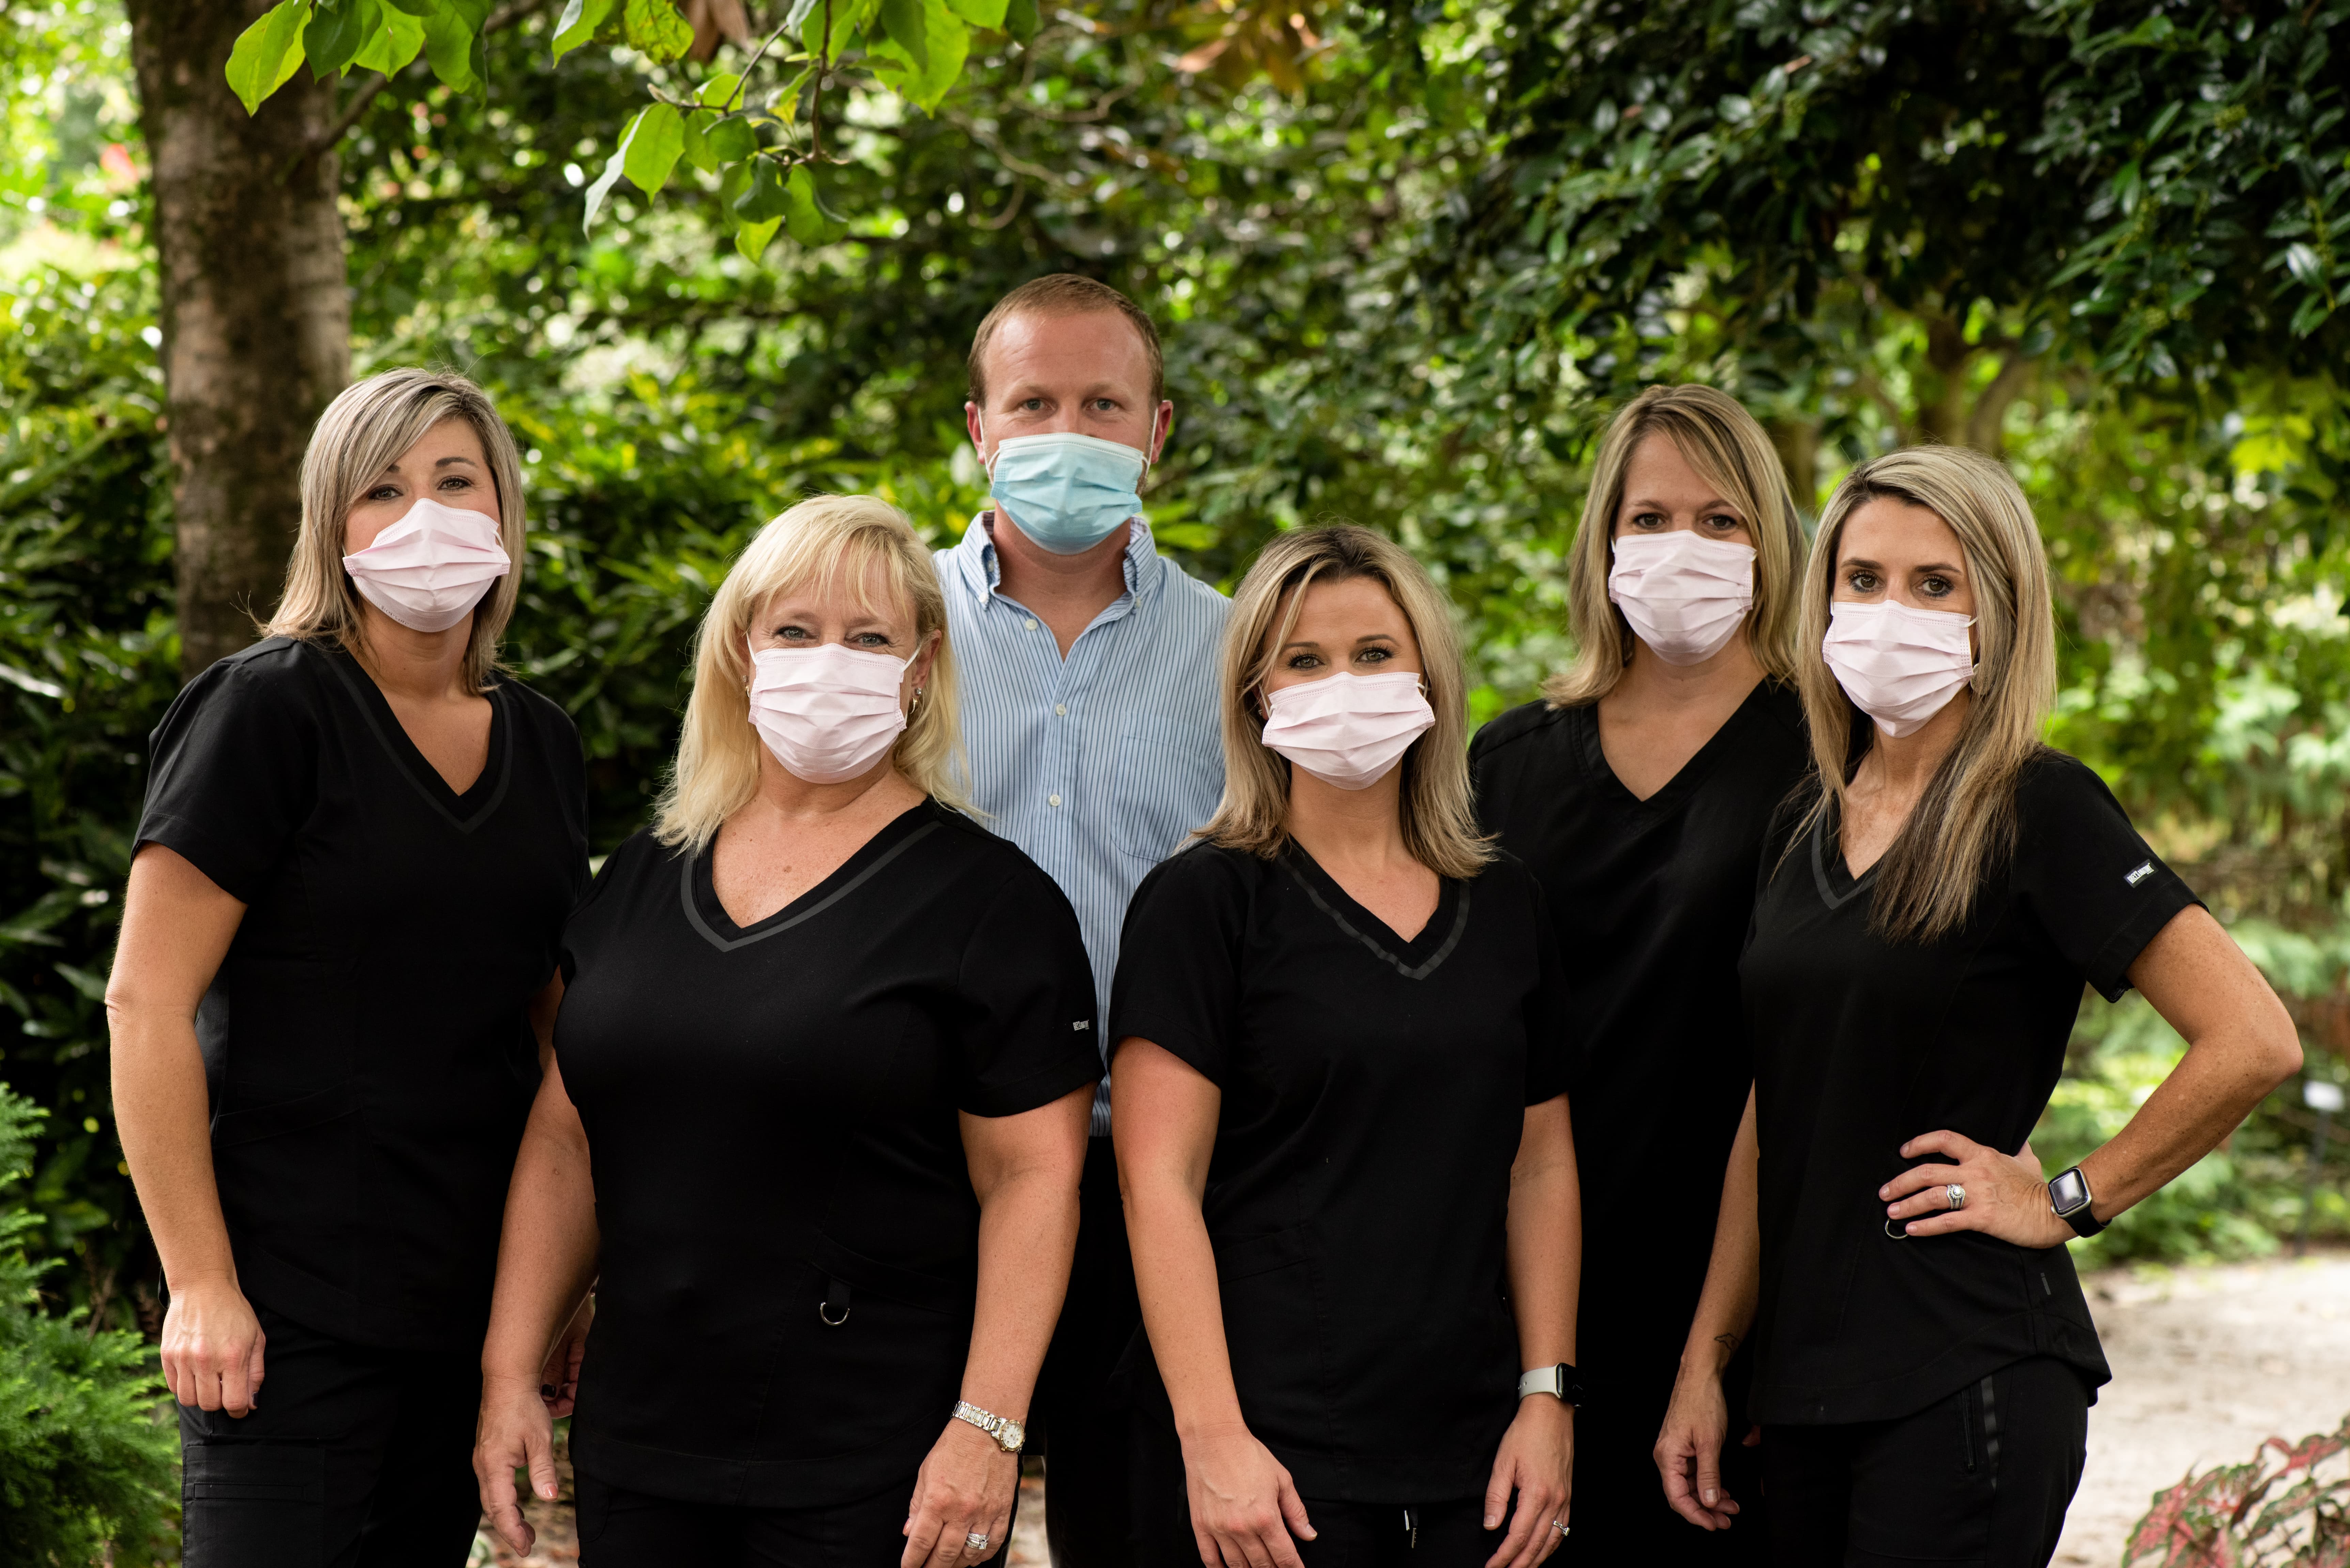 The family Dentistry team wearing masks